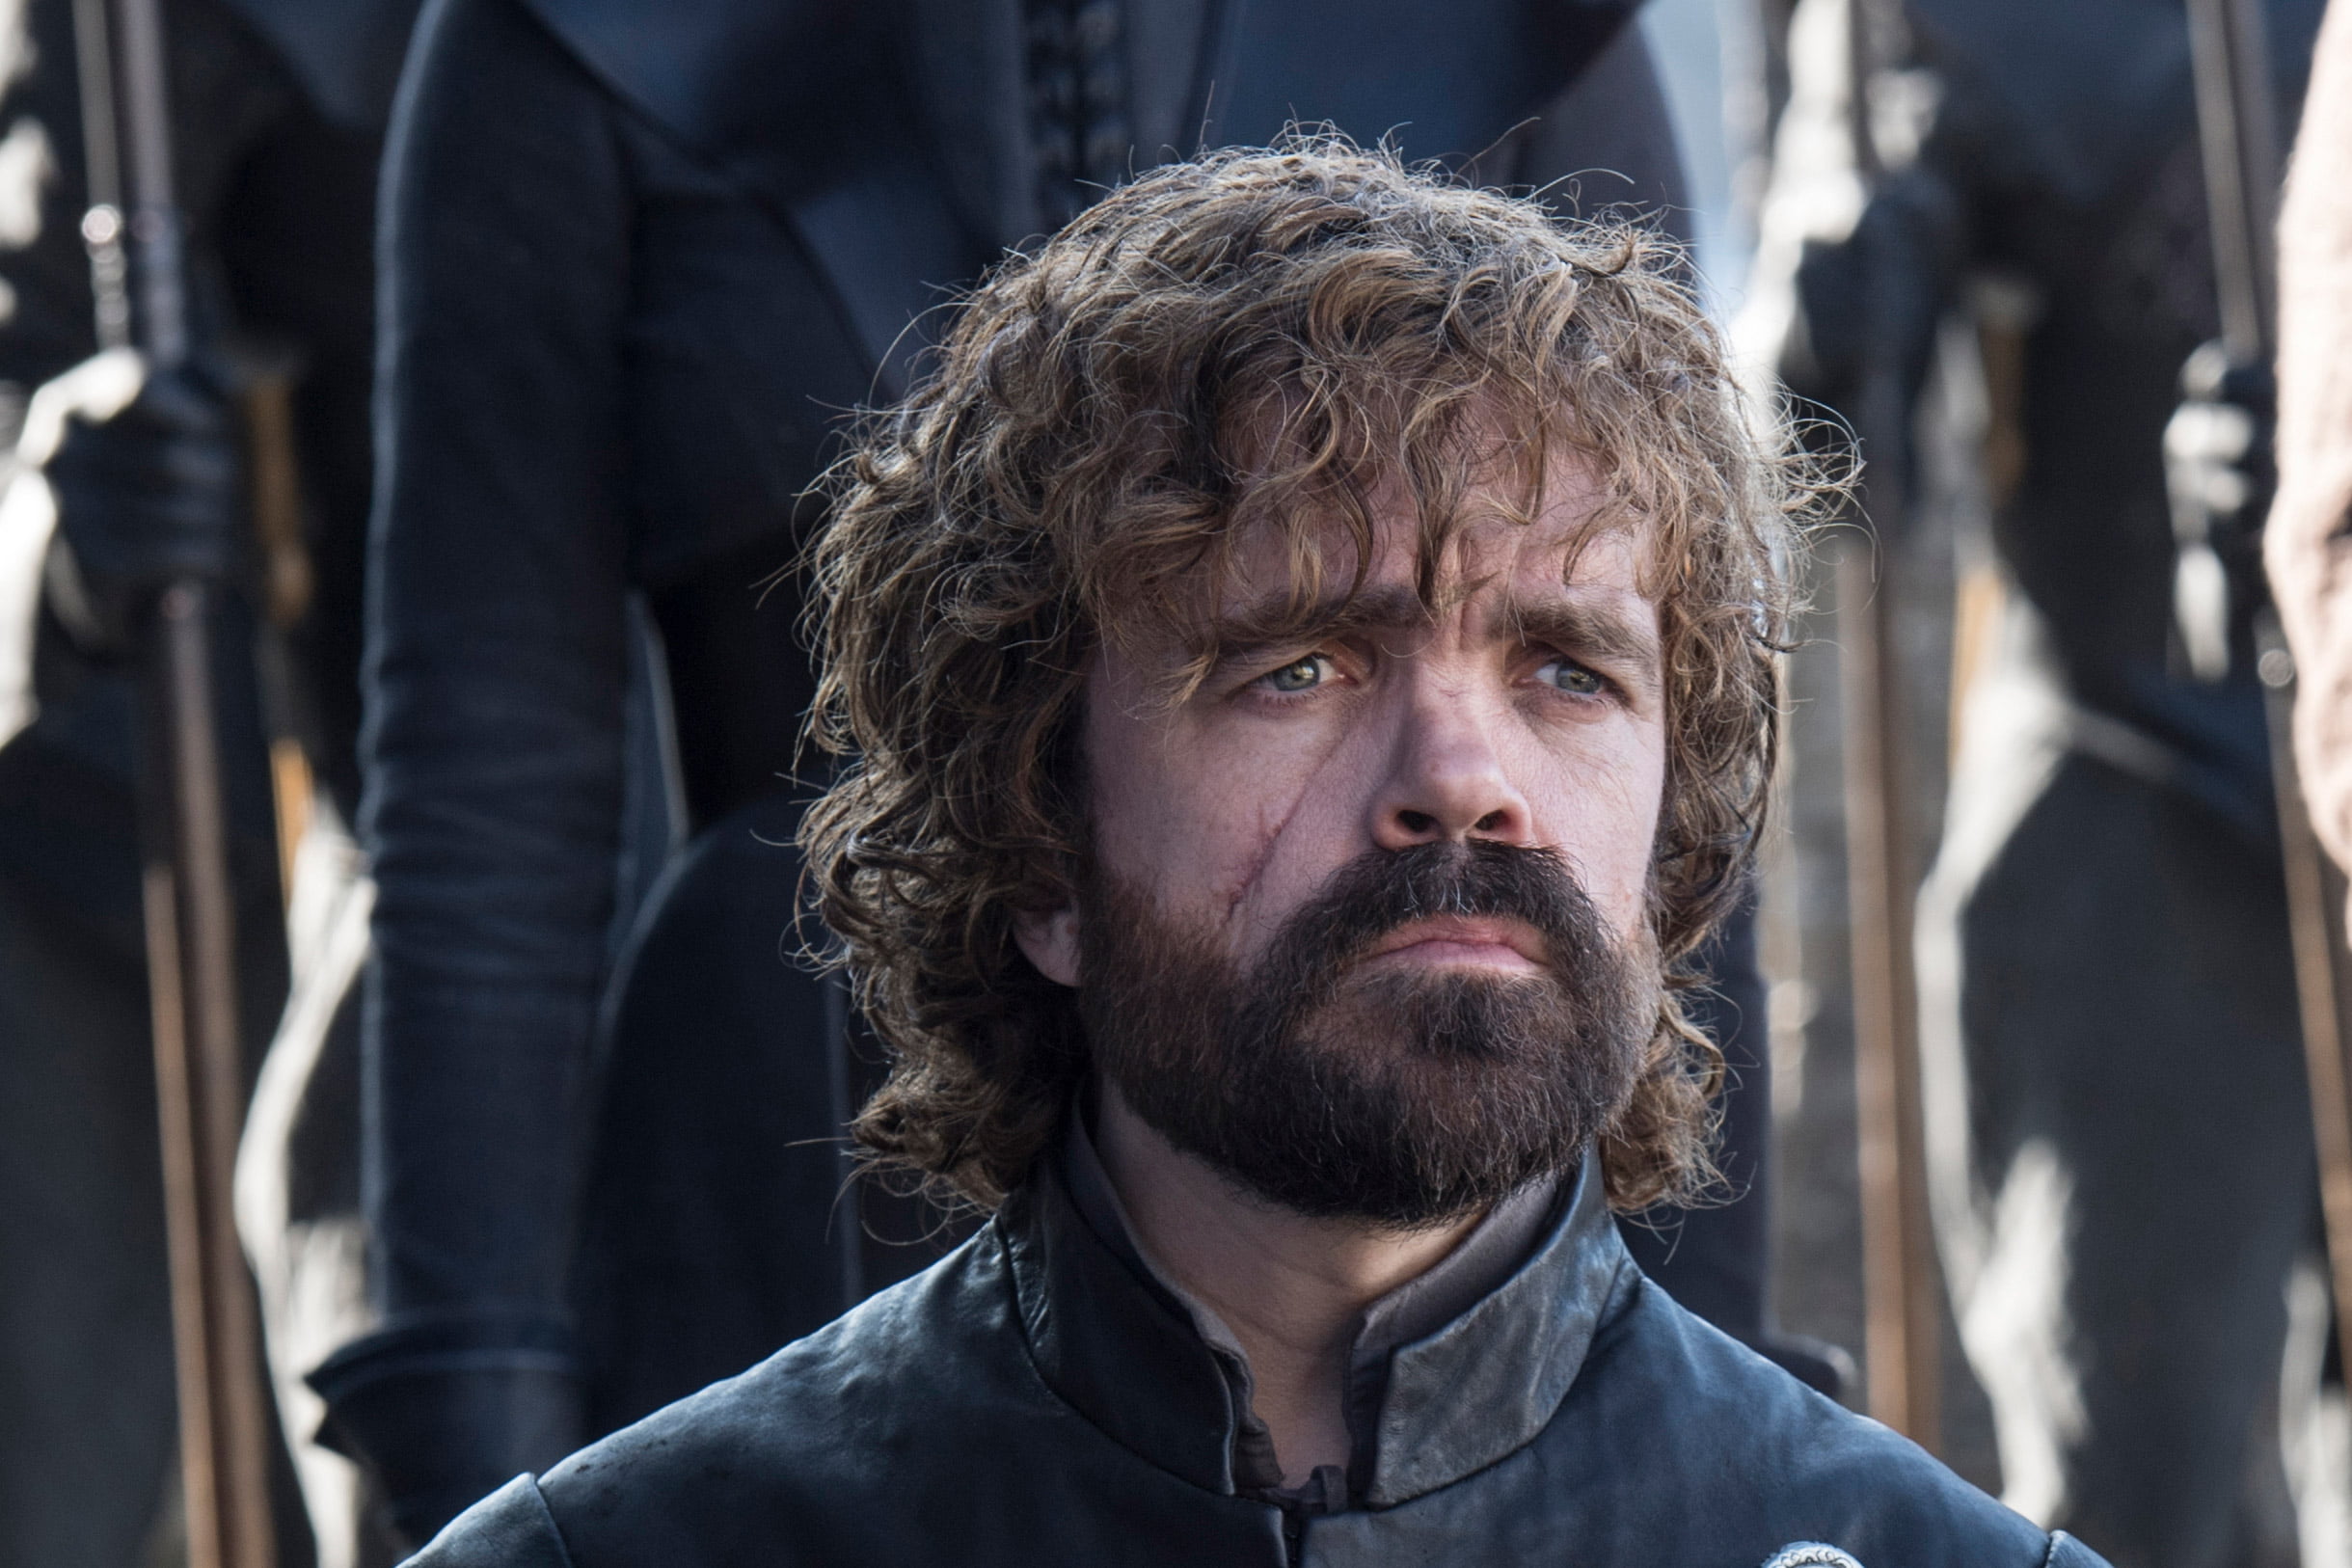 game of thrones season 7, tyrion lannister, tv shows, hd, 4k